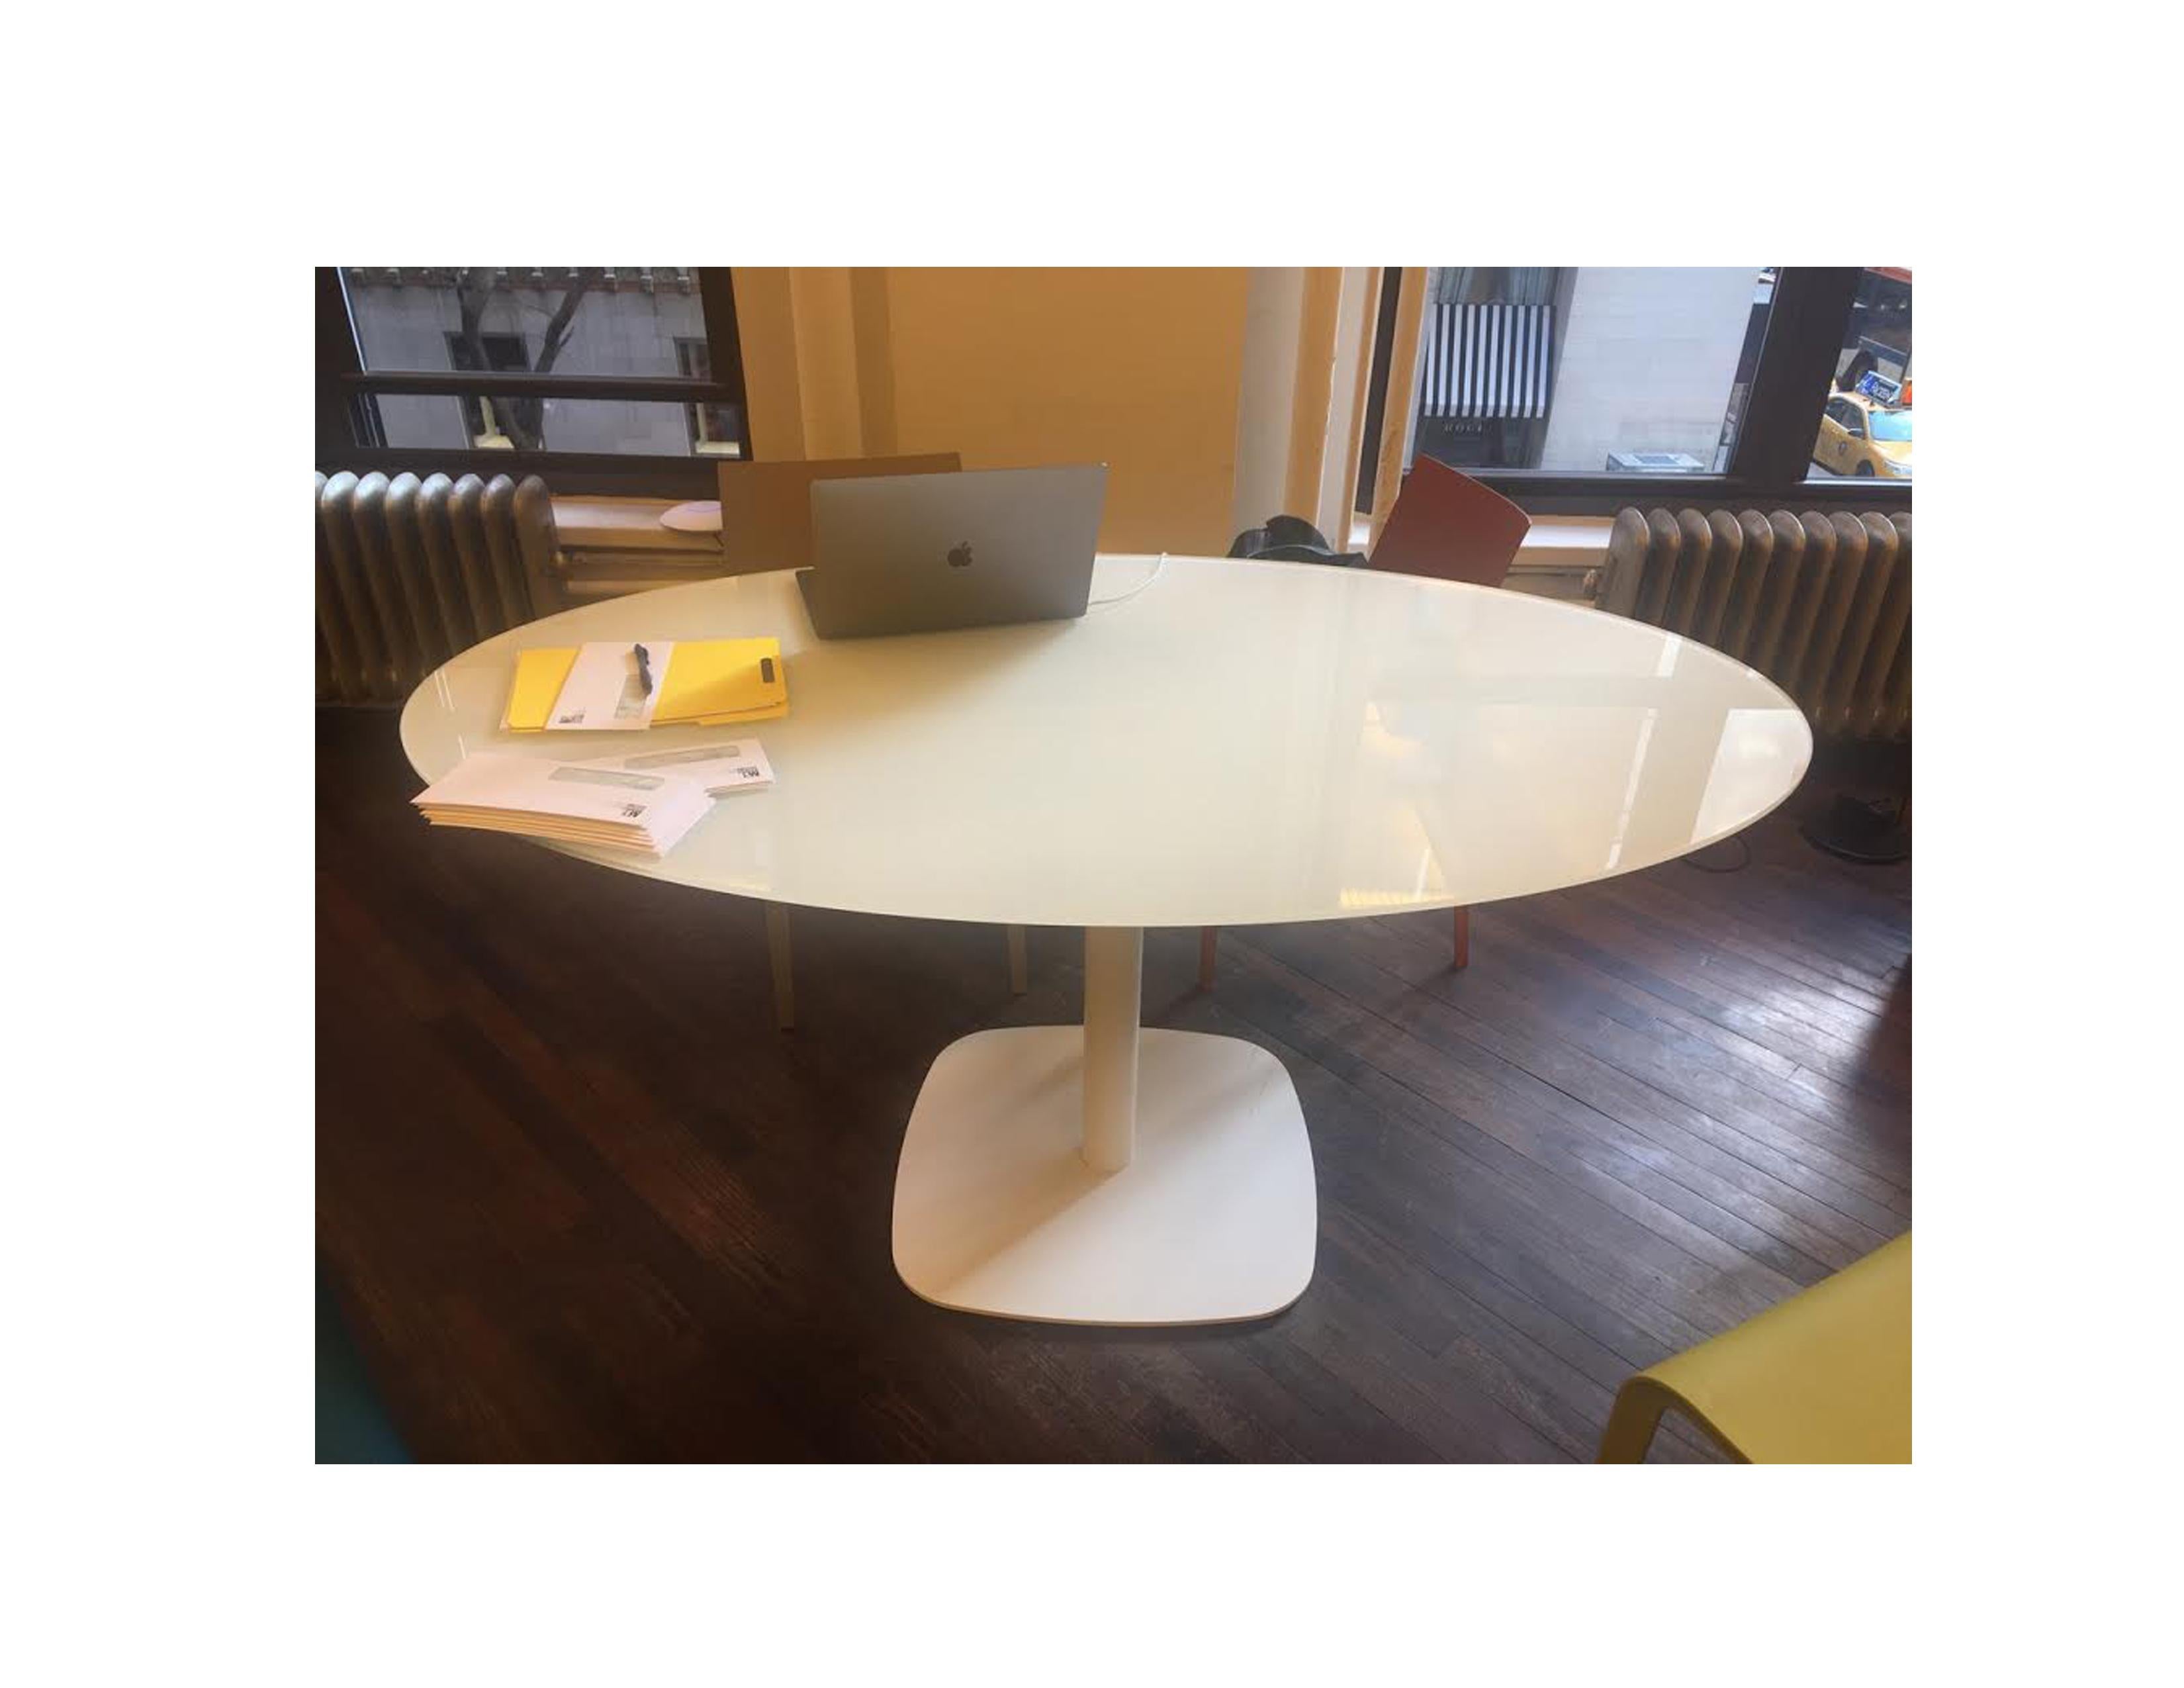 Small meeting table oval - Dining height
Top: Bianco (white) V4 lacquered glass
Base: white varnished dimension: 63.2